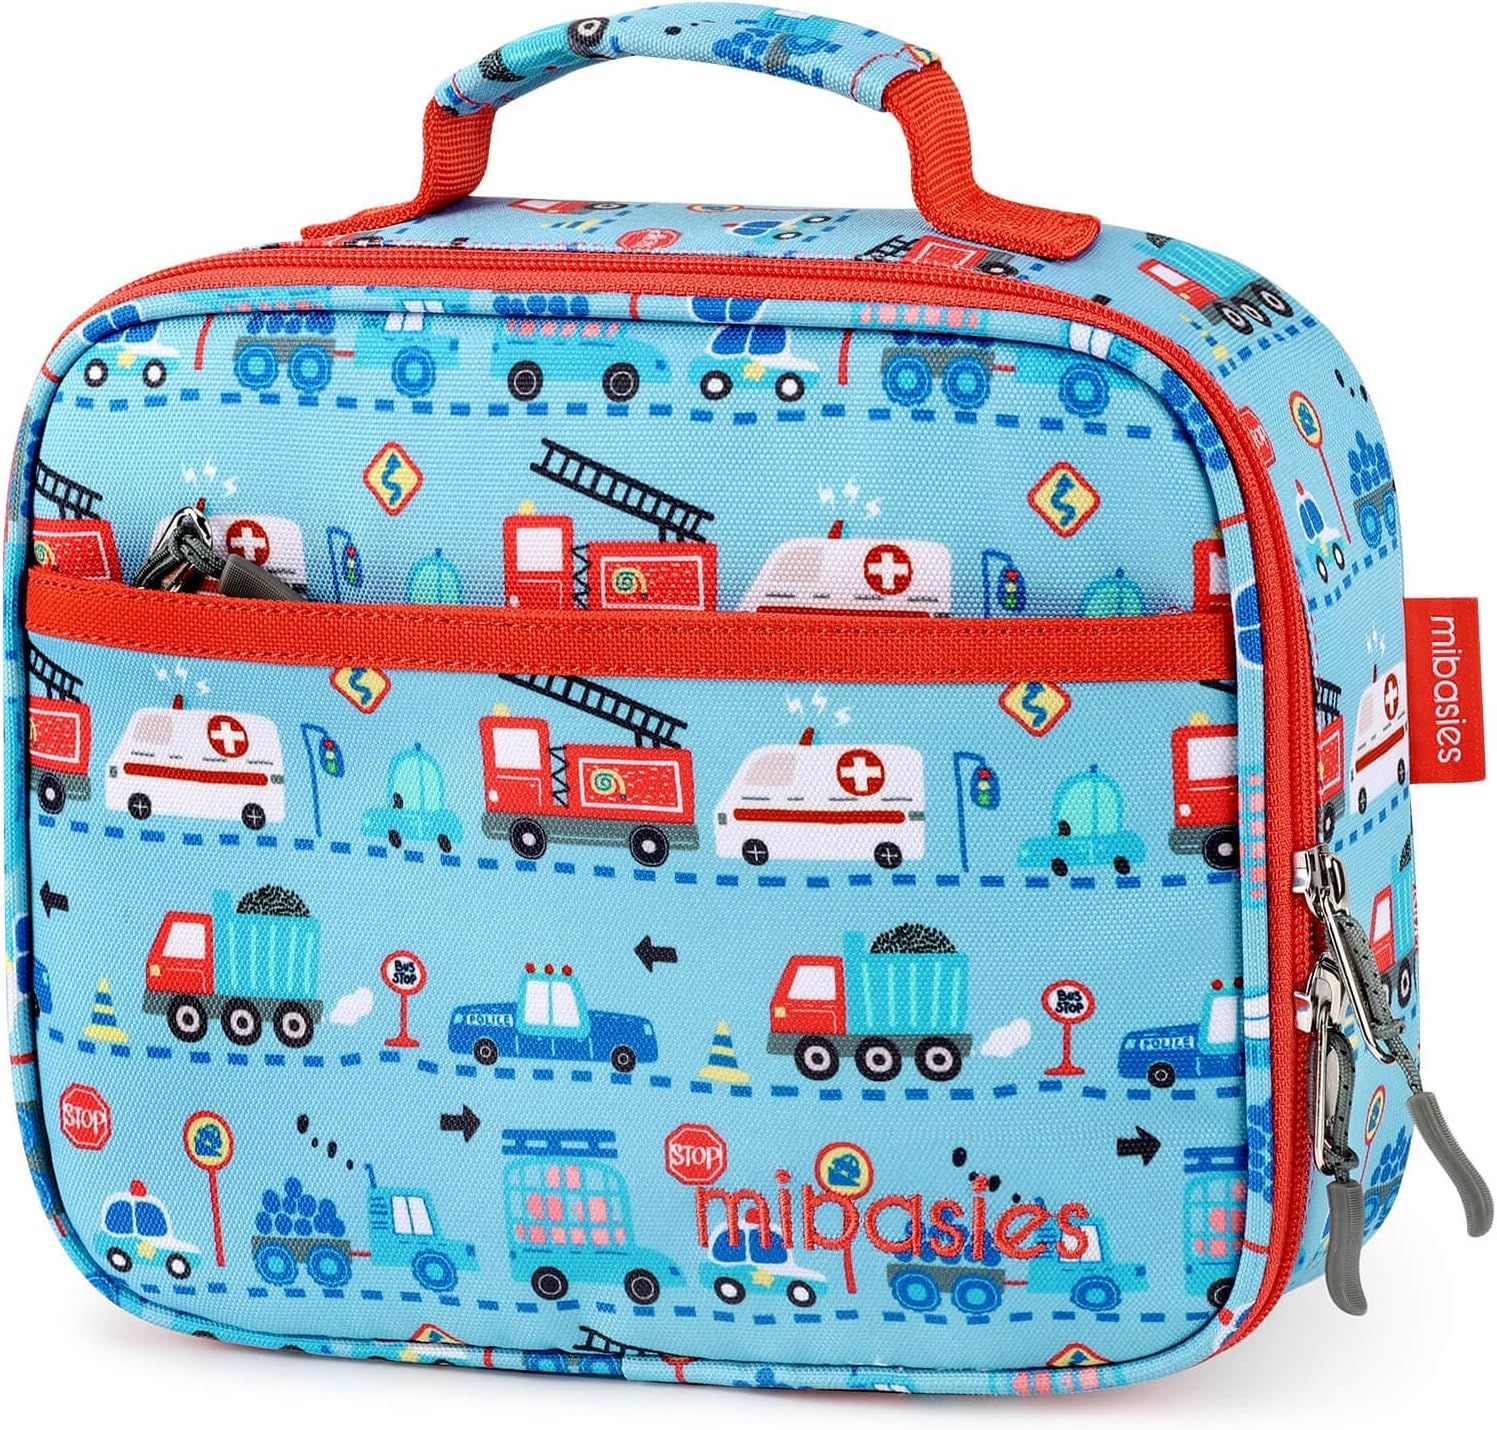 Some of our favorite lunch bags for kids get even cuter